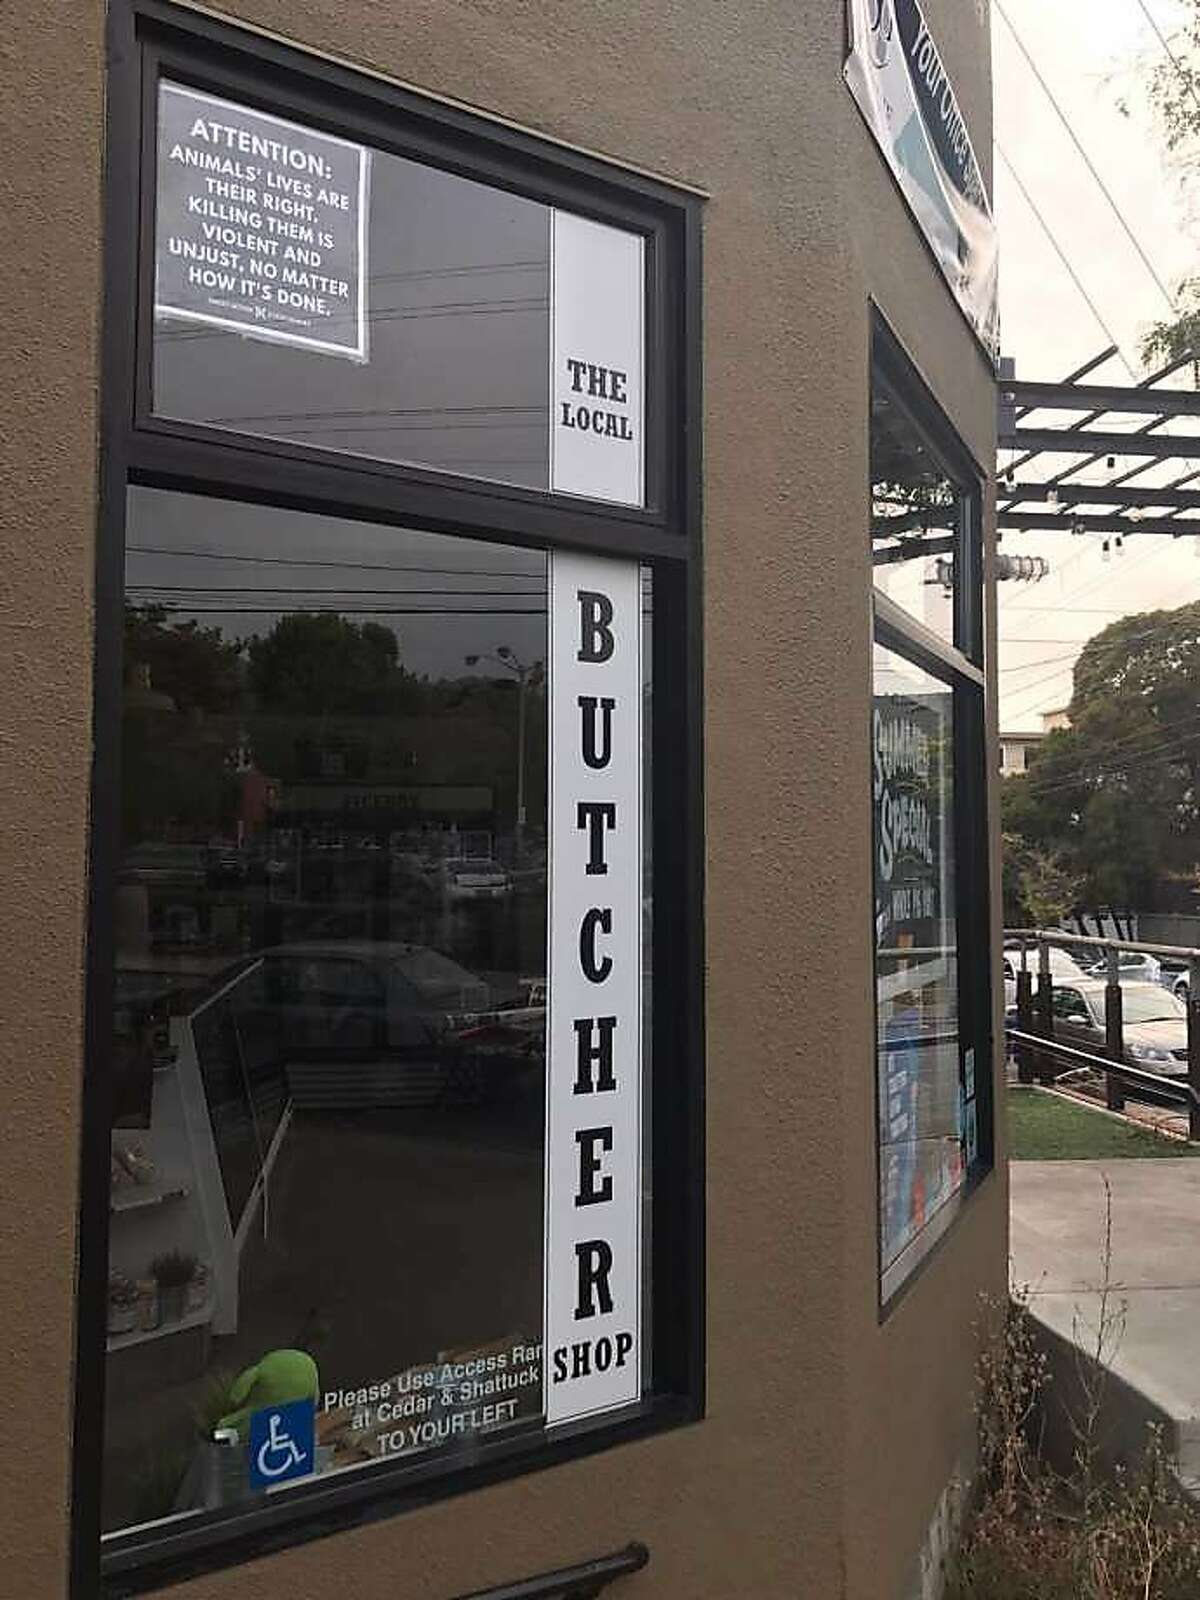 Local Butcher Shop in Berkeley has put up a sign to appease animal rights protestors